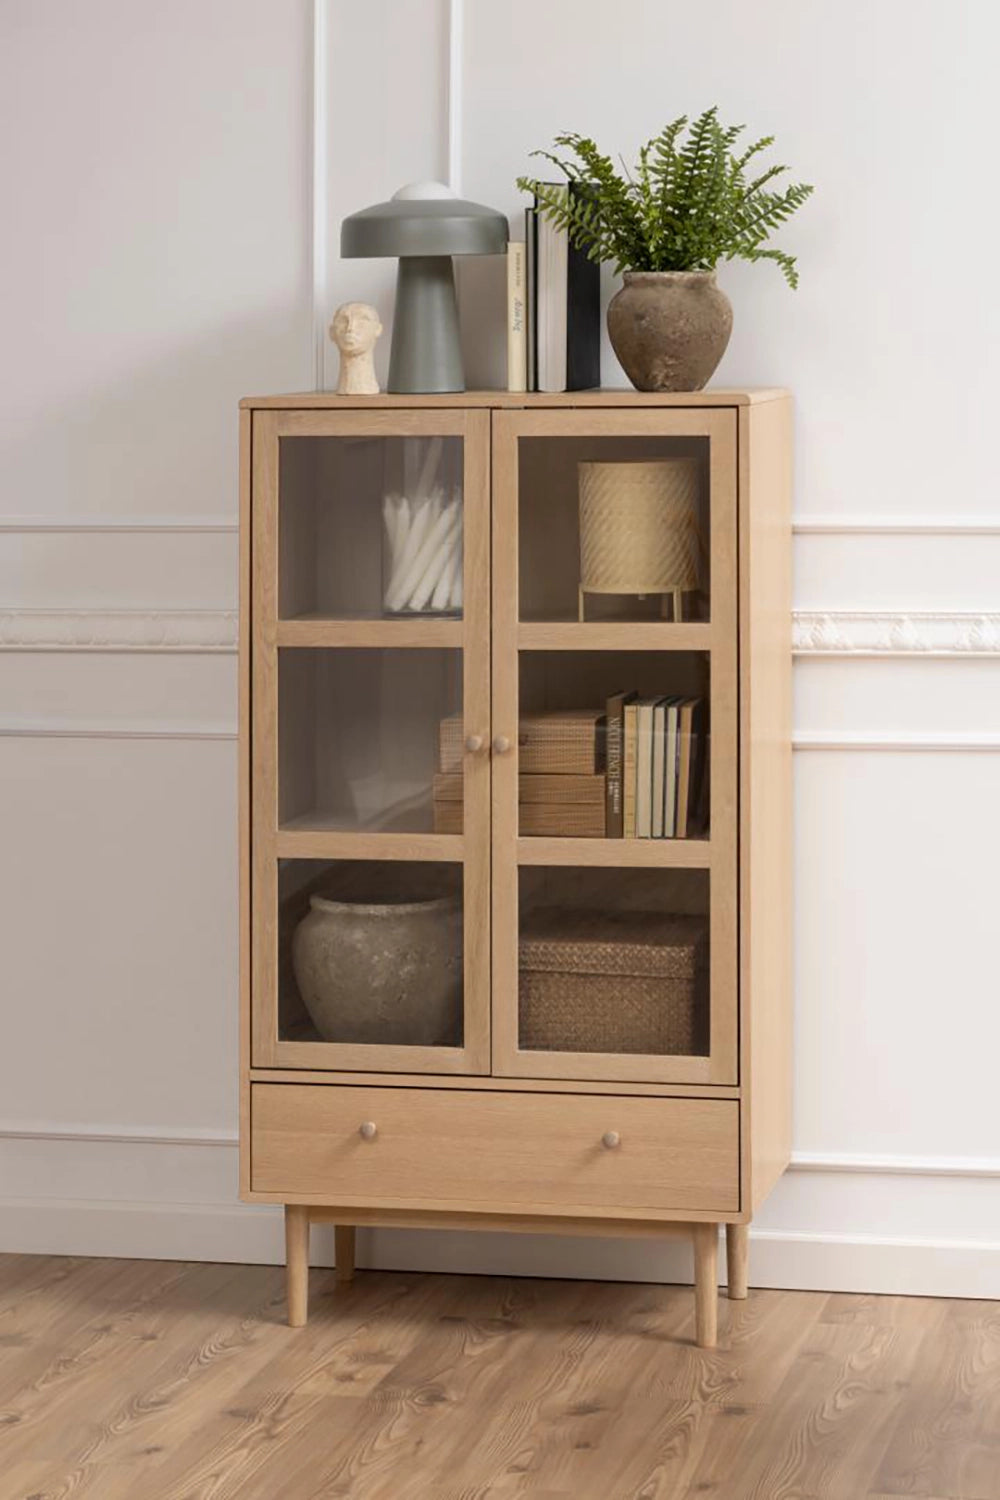 Krutcher Display Cabinet in White Oak Finish with Clay Plant Pot and Books Inside in Living Room Setting